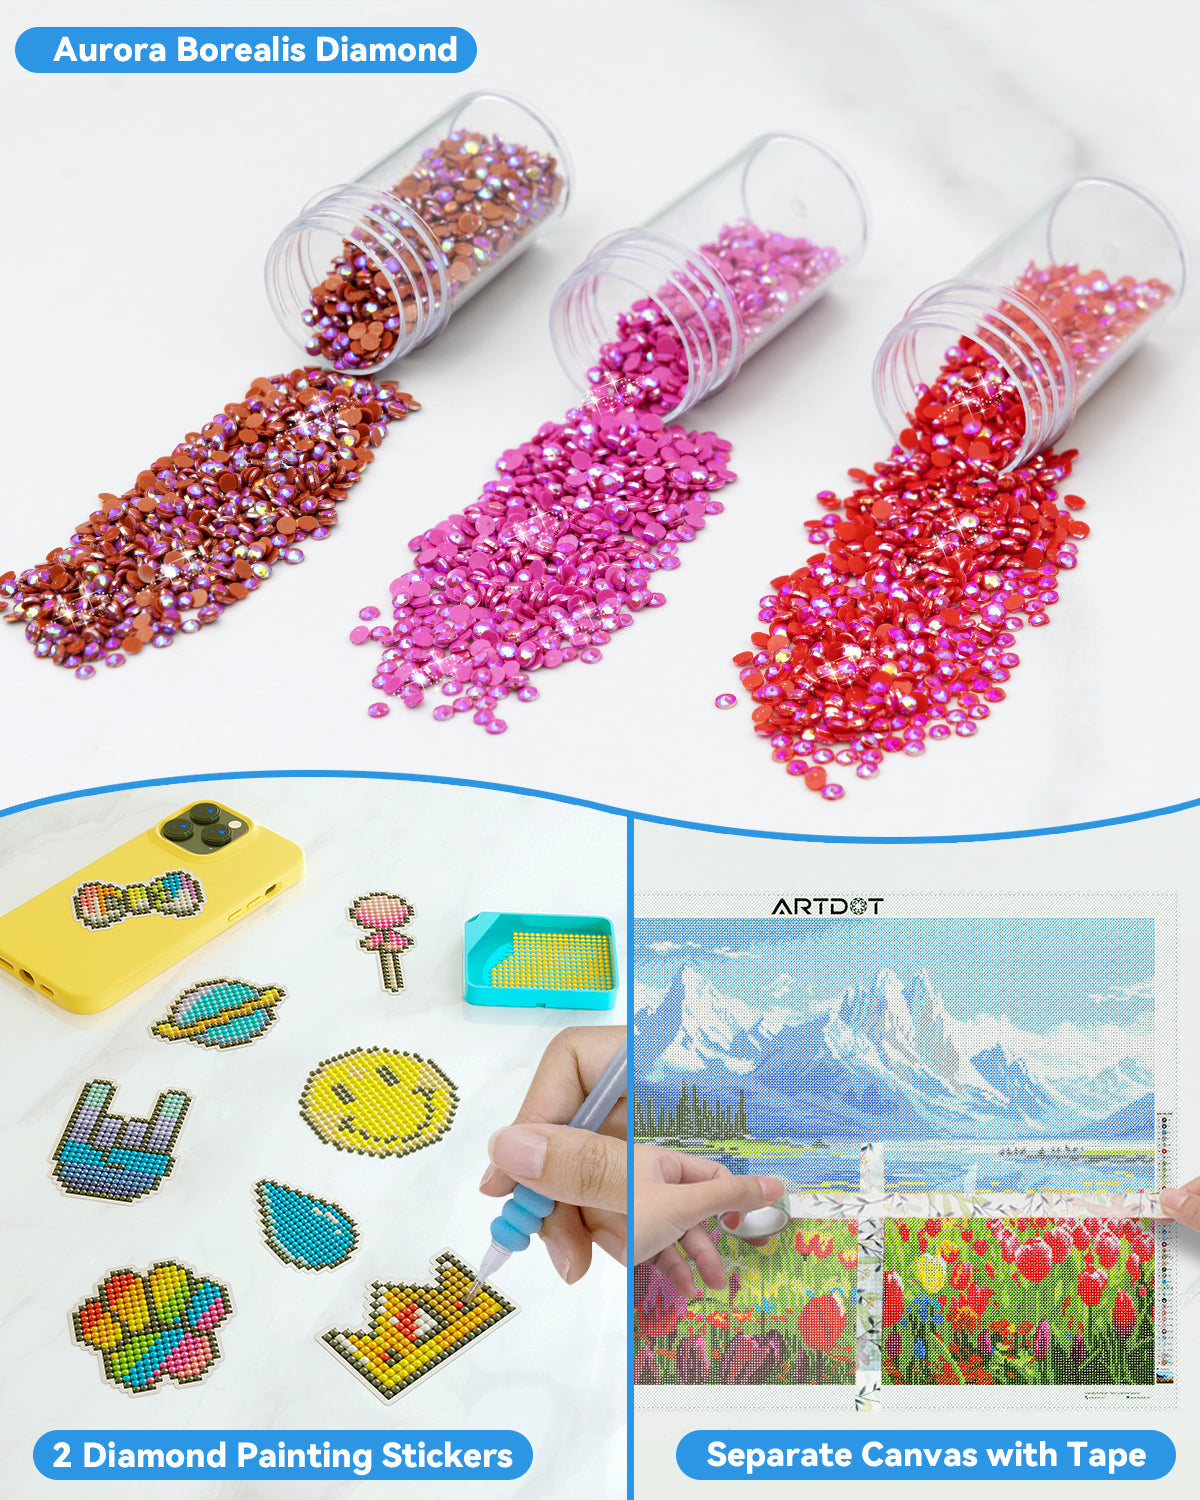 The beads and stickers included in Artdot diamond painting